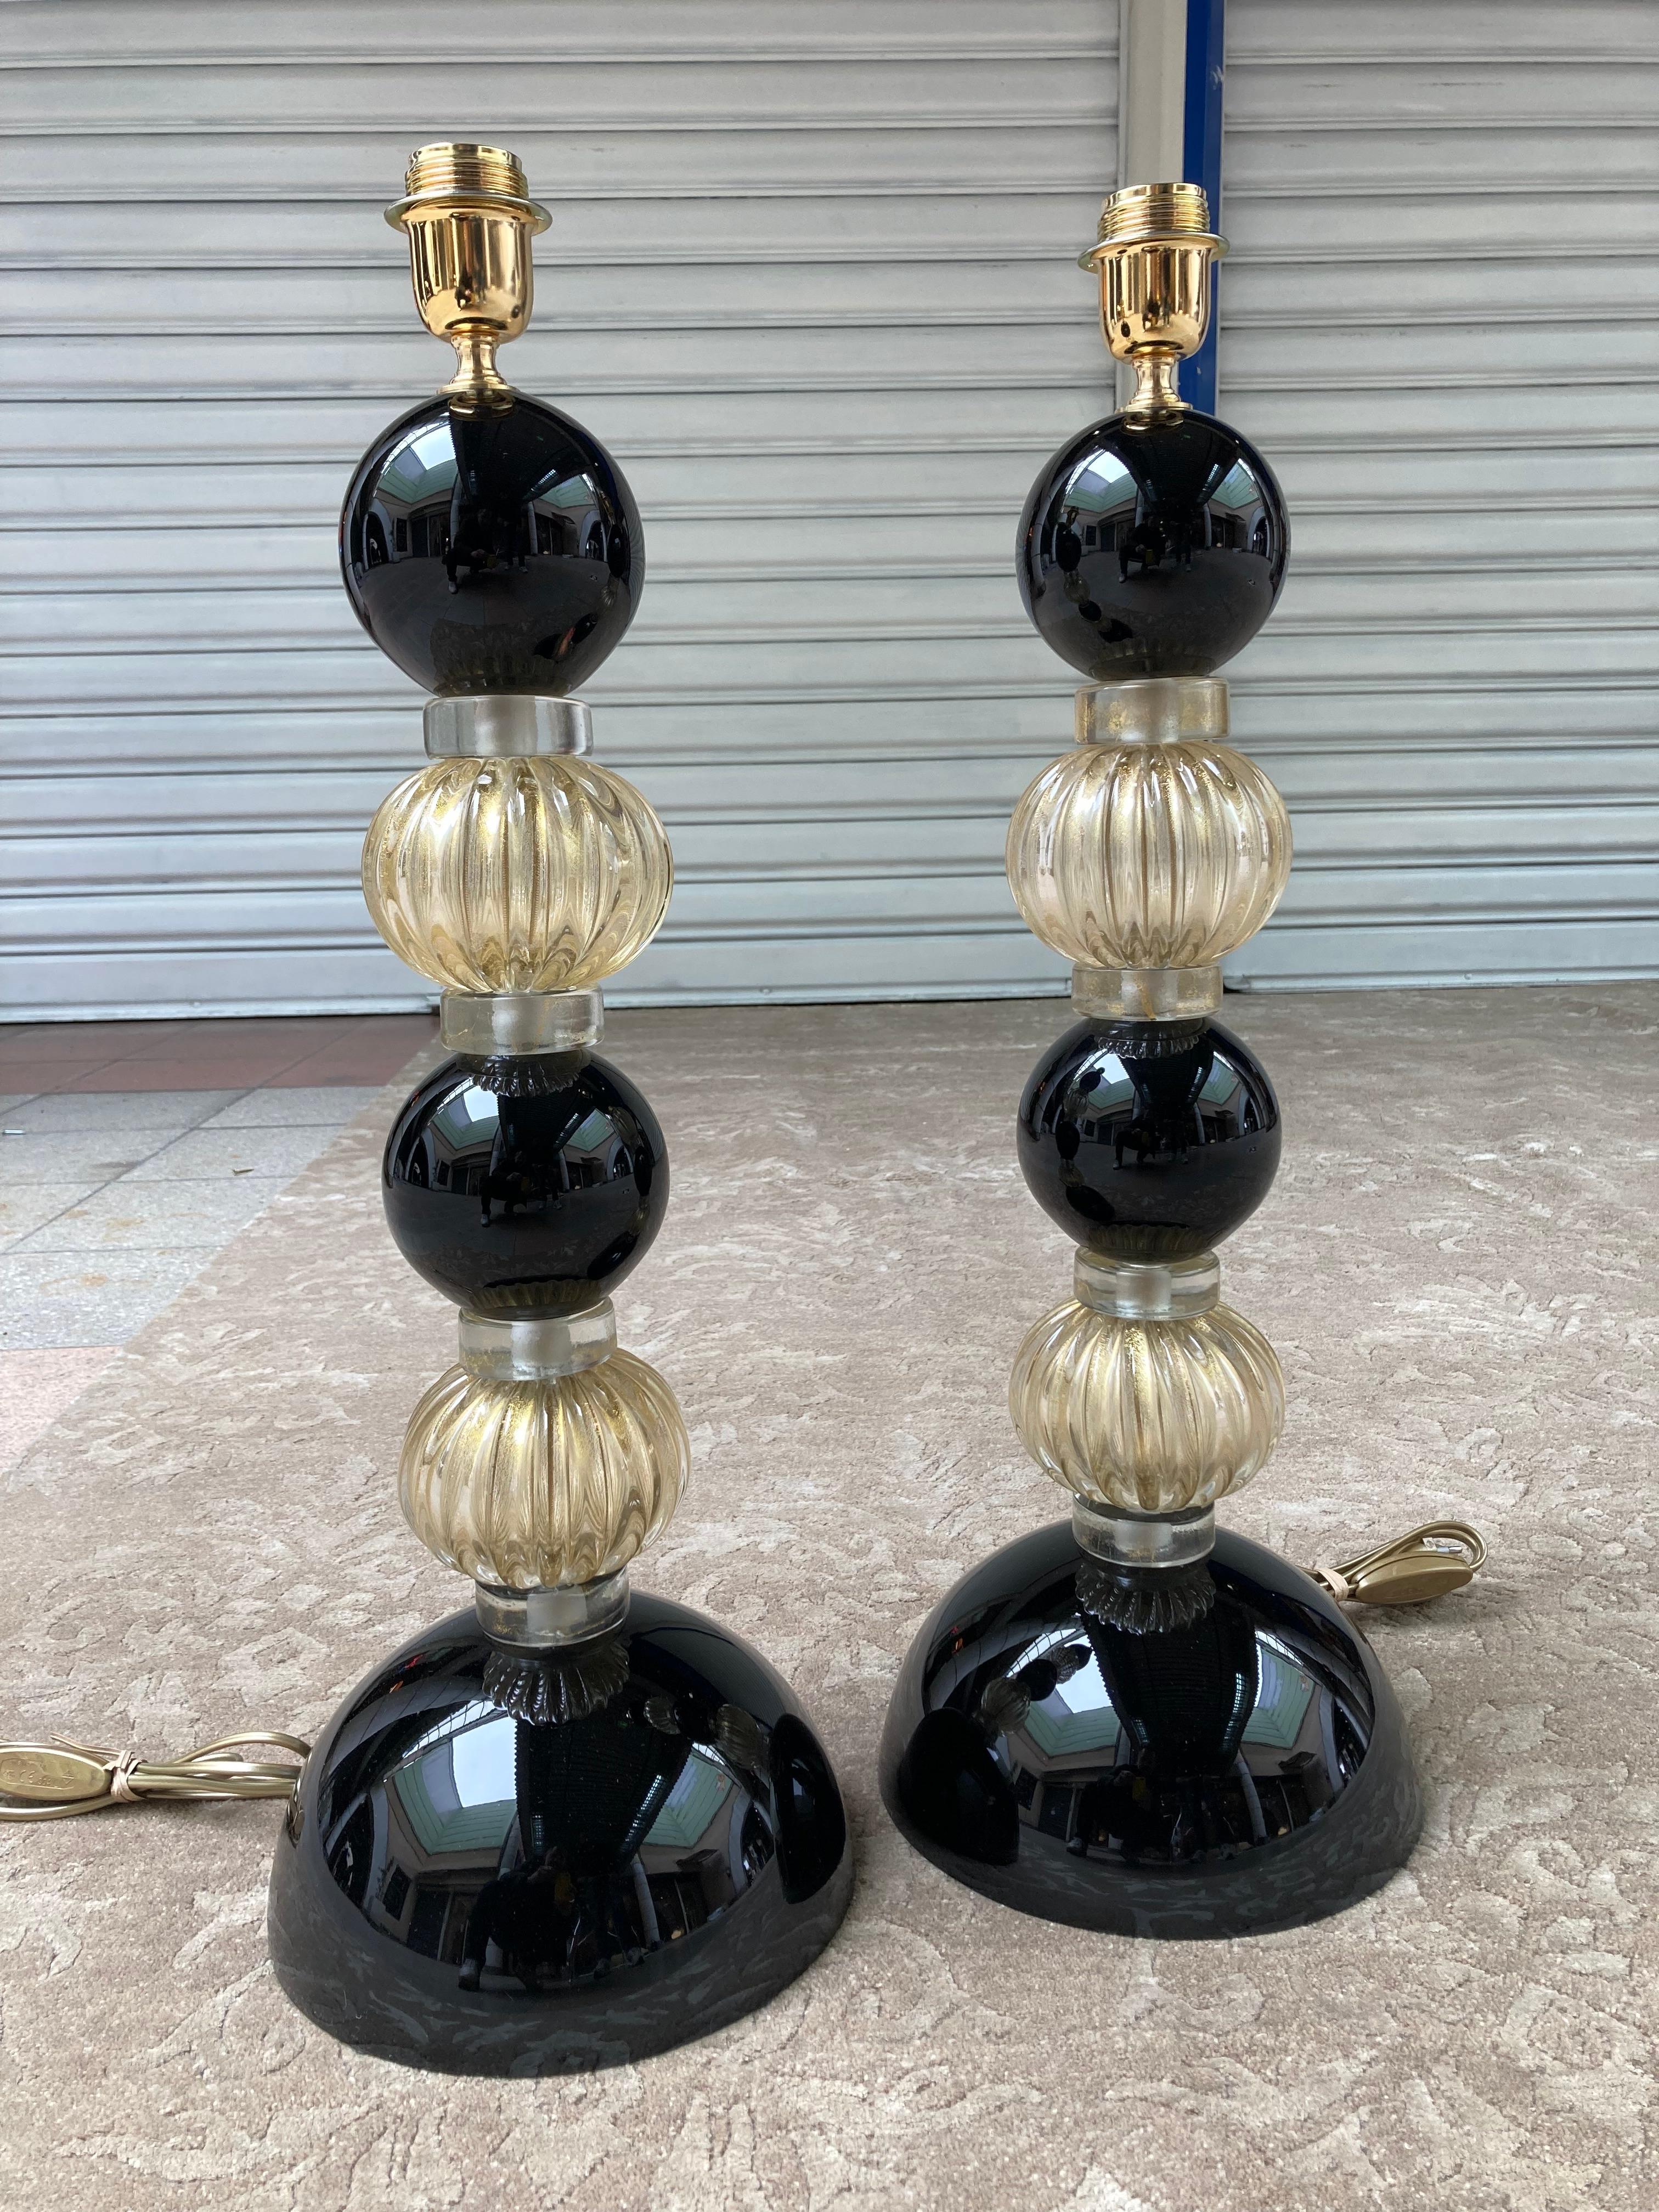 Pair of black lamp bases - Signed Toso.
Murano glass.
Circa 1980.
Measures: H 63 x D 23 cms.
Signed at the foot.
Shower feet with alternating spheres in ribbed glass and smooth glass.
In perfect condition / Electrical operation OK.